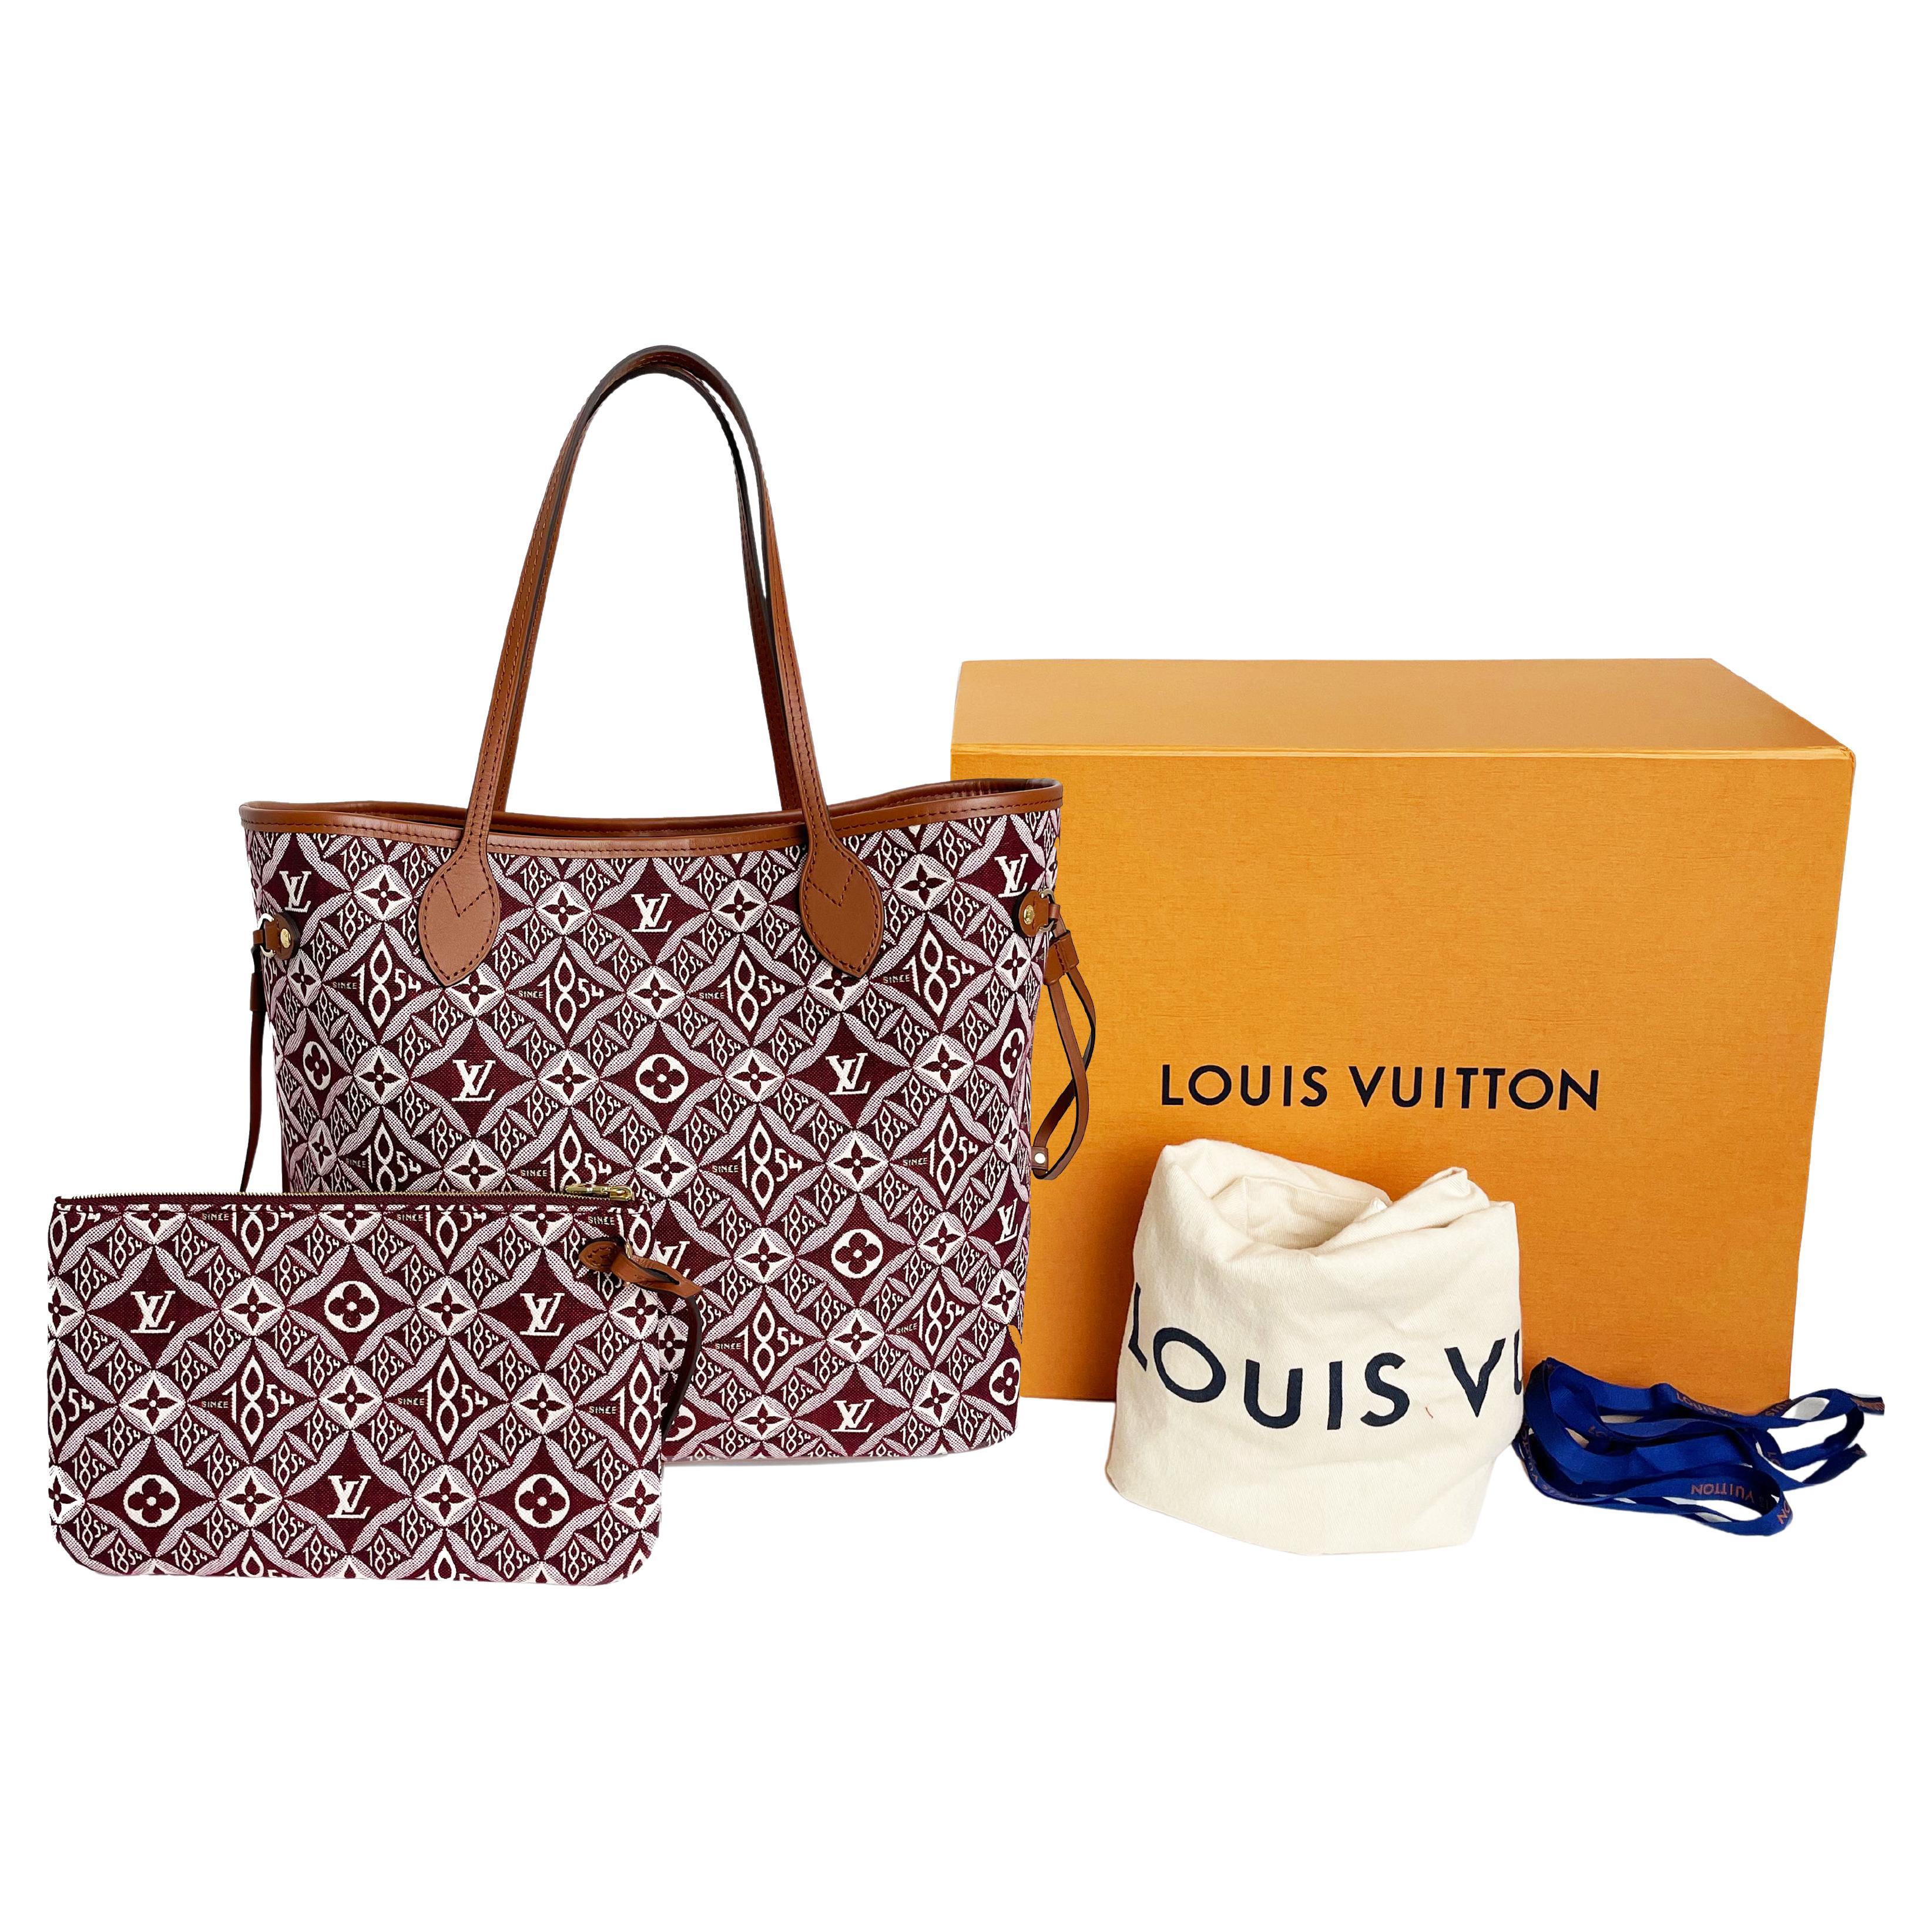 2 FAB LOUIS VUITTON SHOE BAGS TLV 44 20 THE FRENCH COMPANY WITH